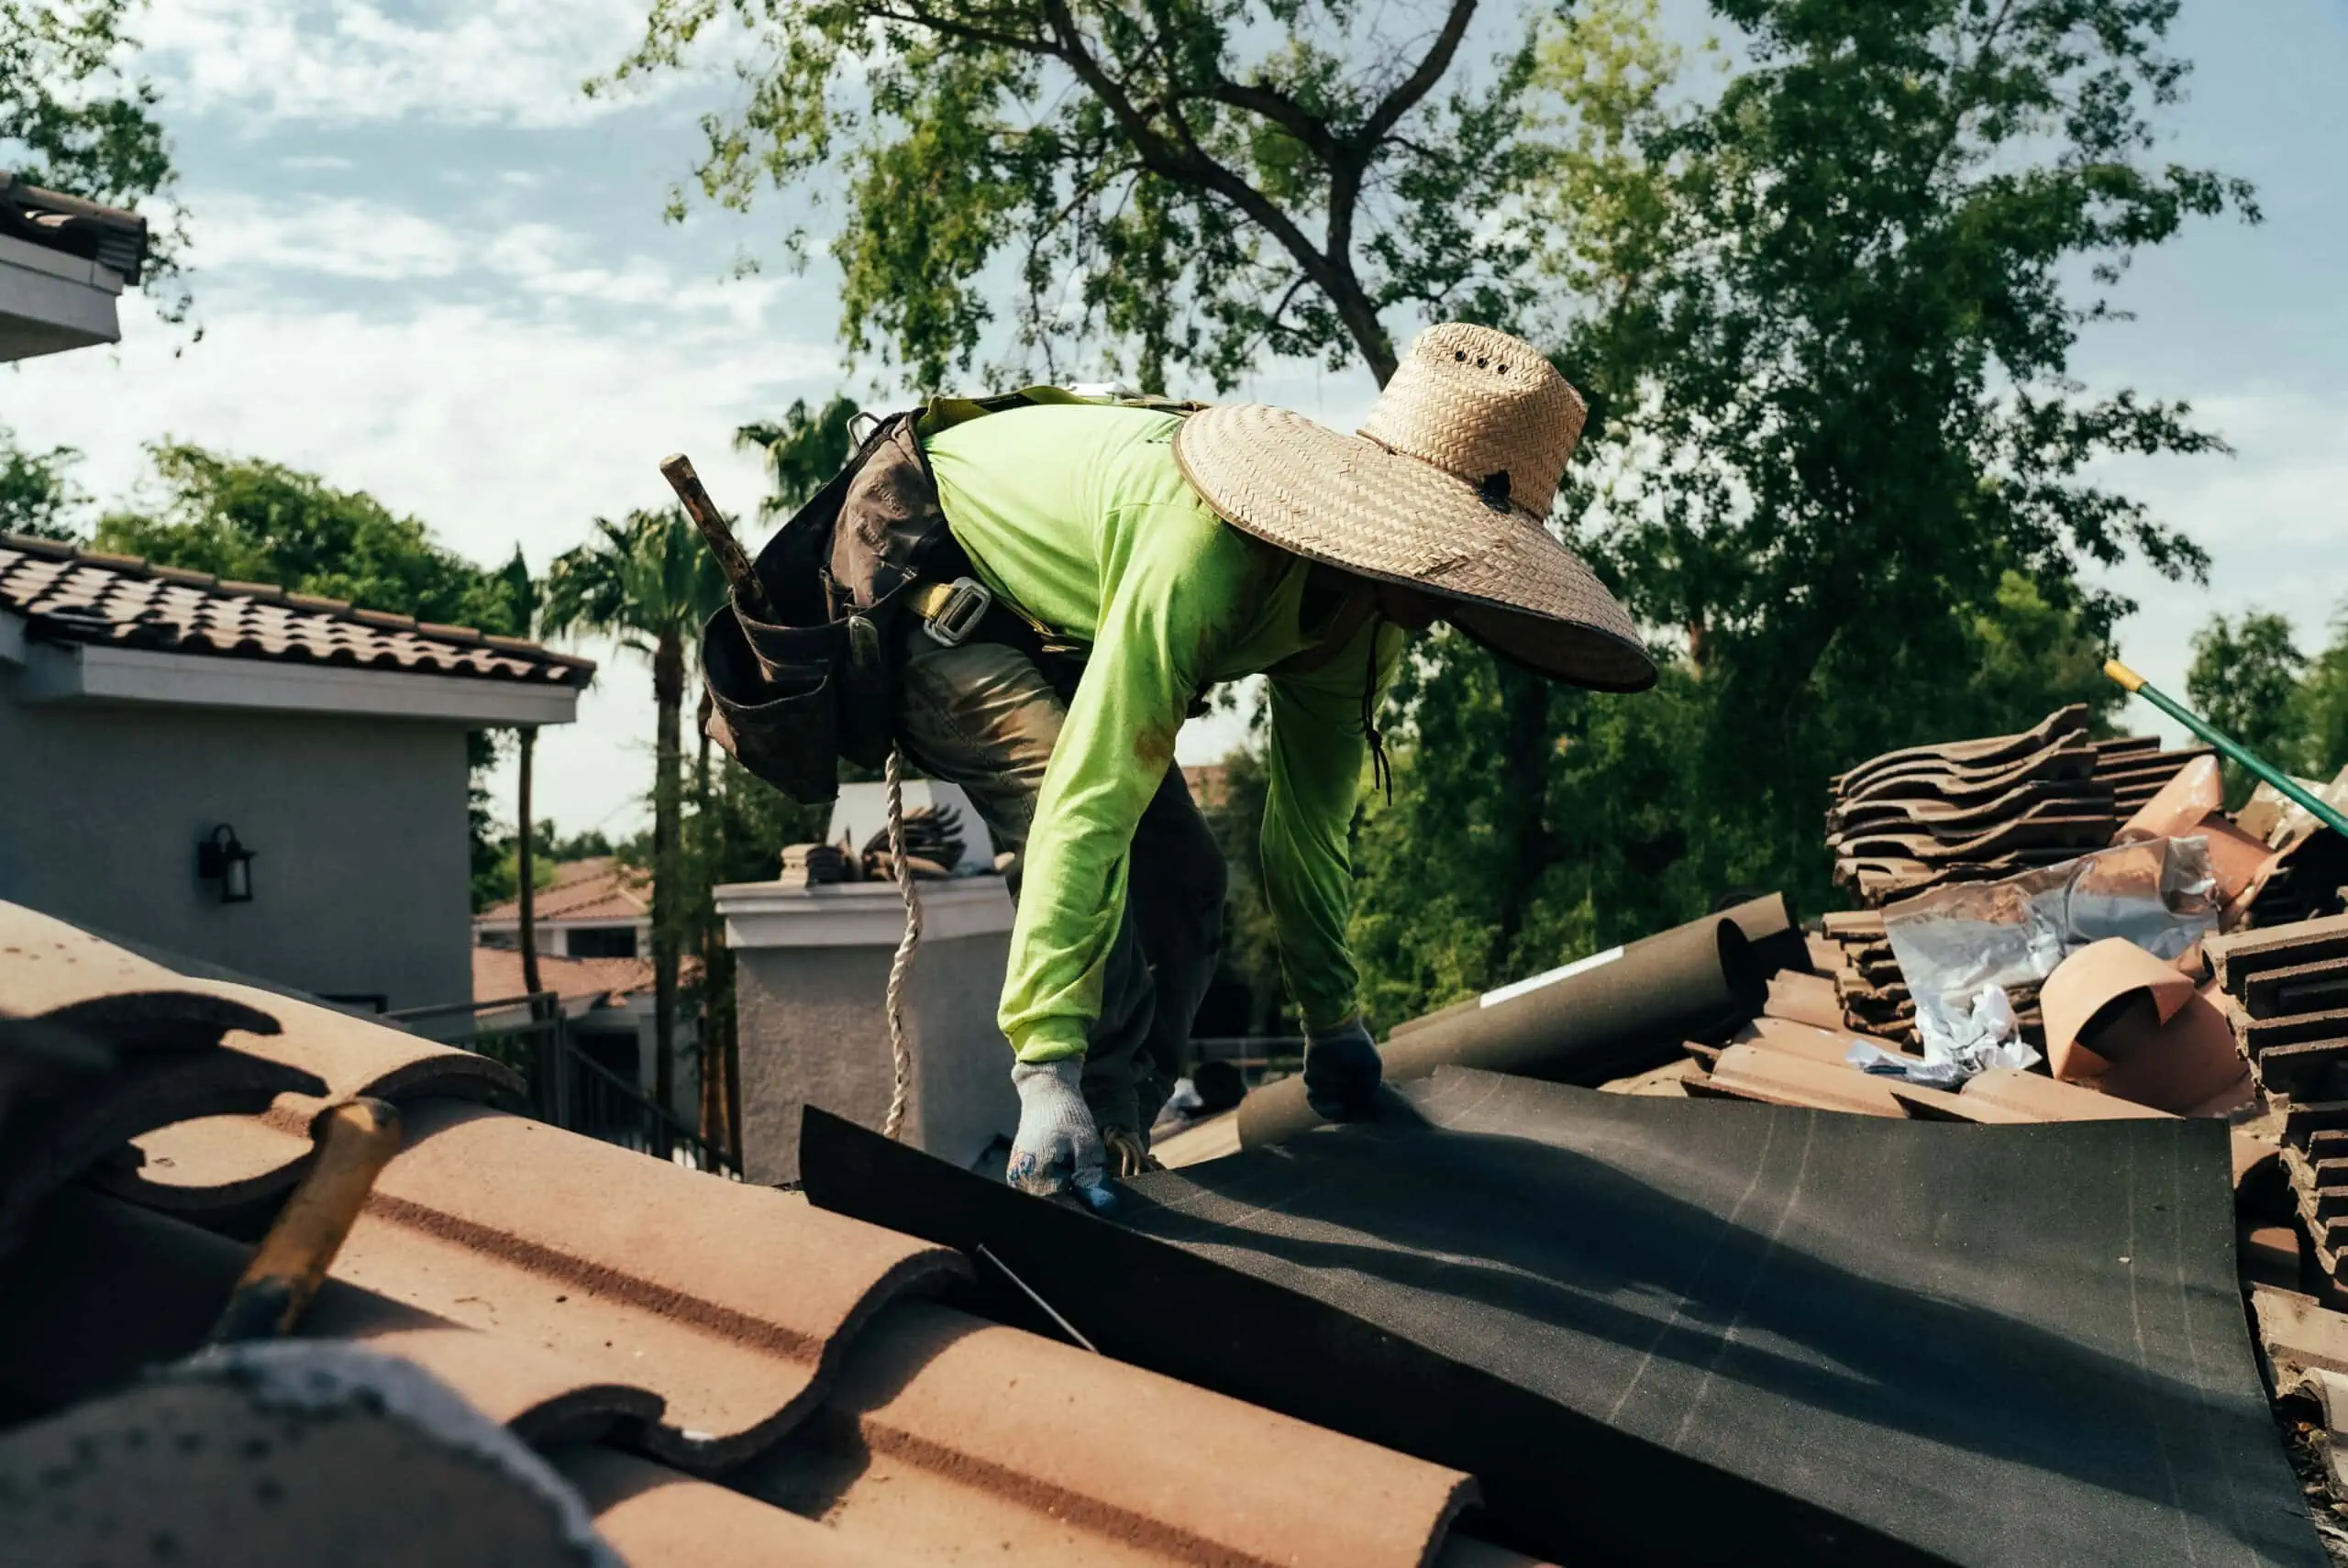 a roofing professional from behmer working on a residential roof in carefree